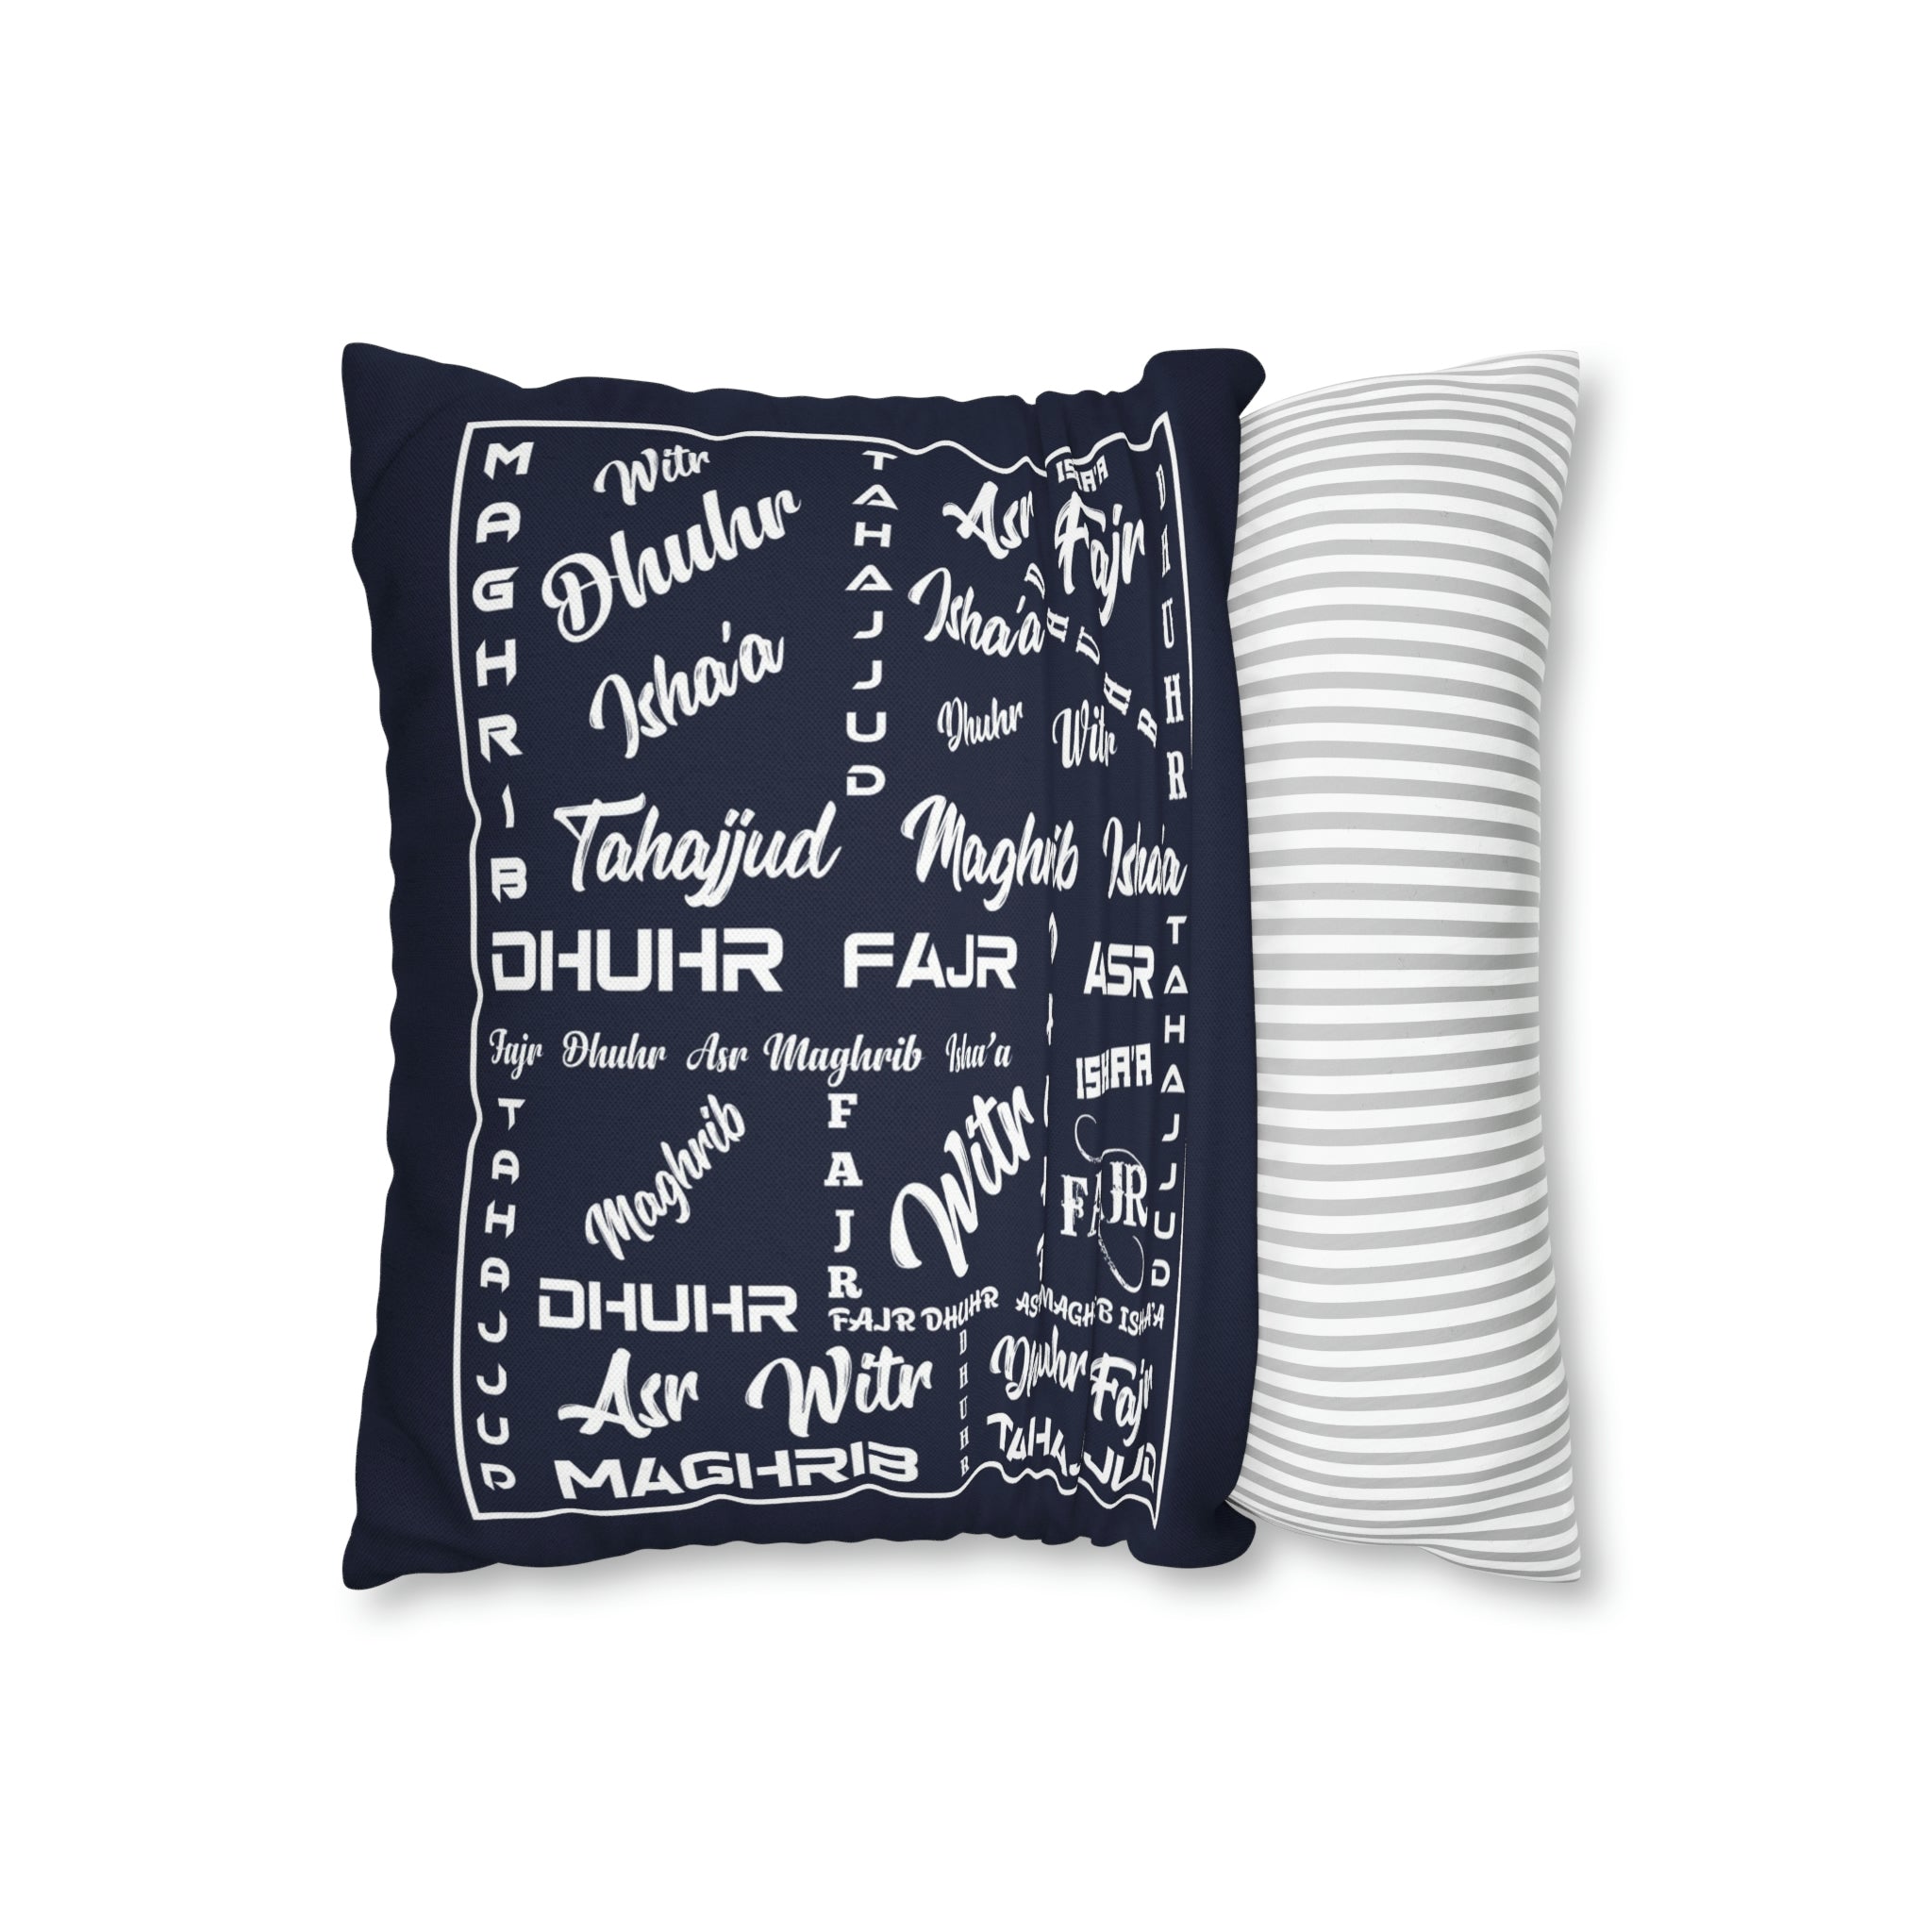 Personalized Spun Polyester Square Pillow Case (Please email me if you'd like to request something personalized)